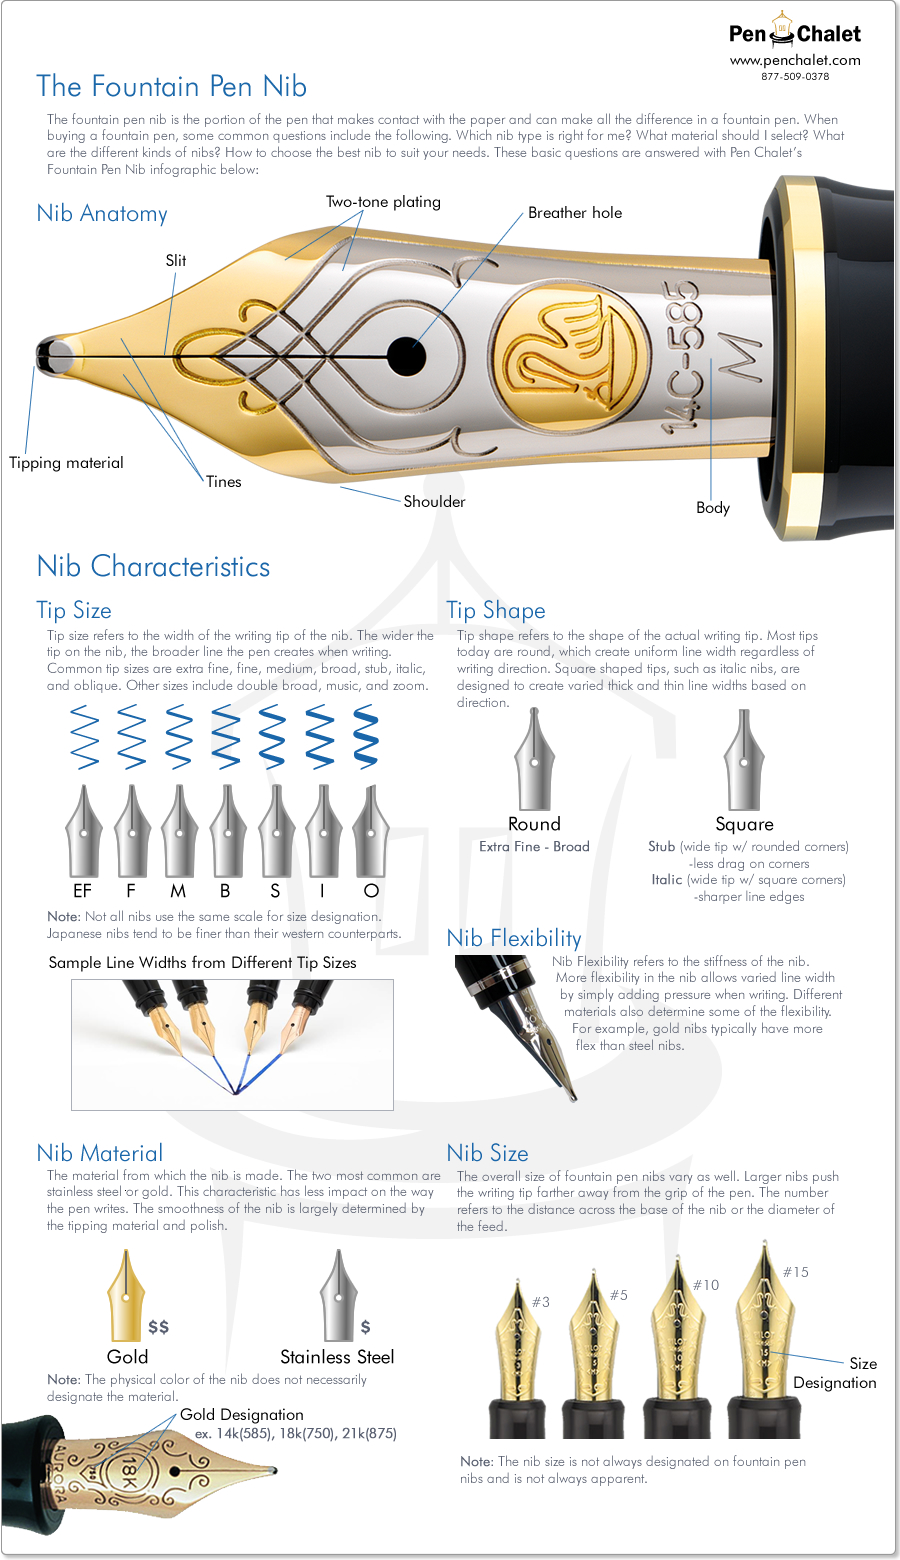 A Nib Infographic at Pen Chalet Inkdependence!